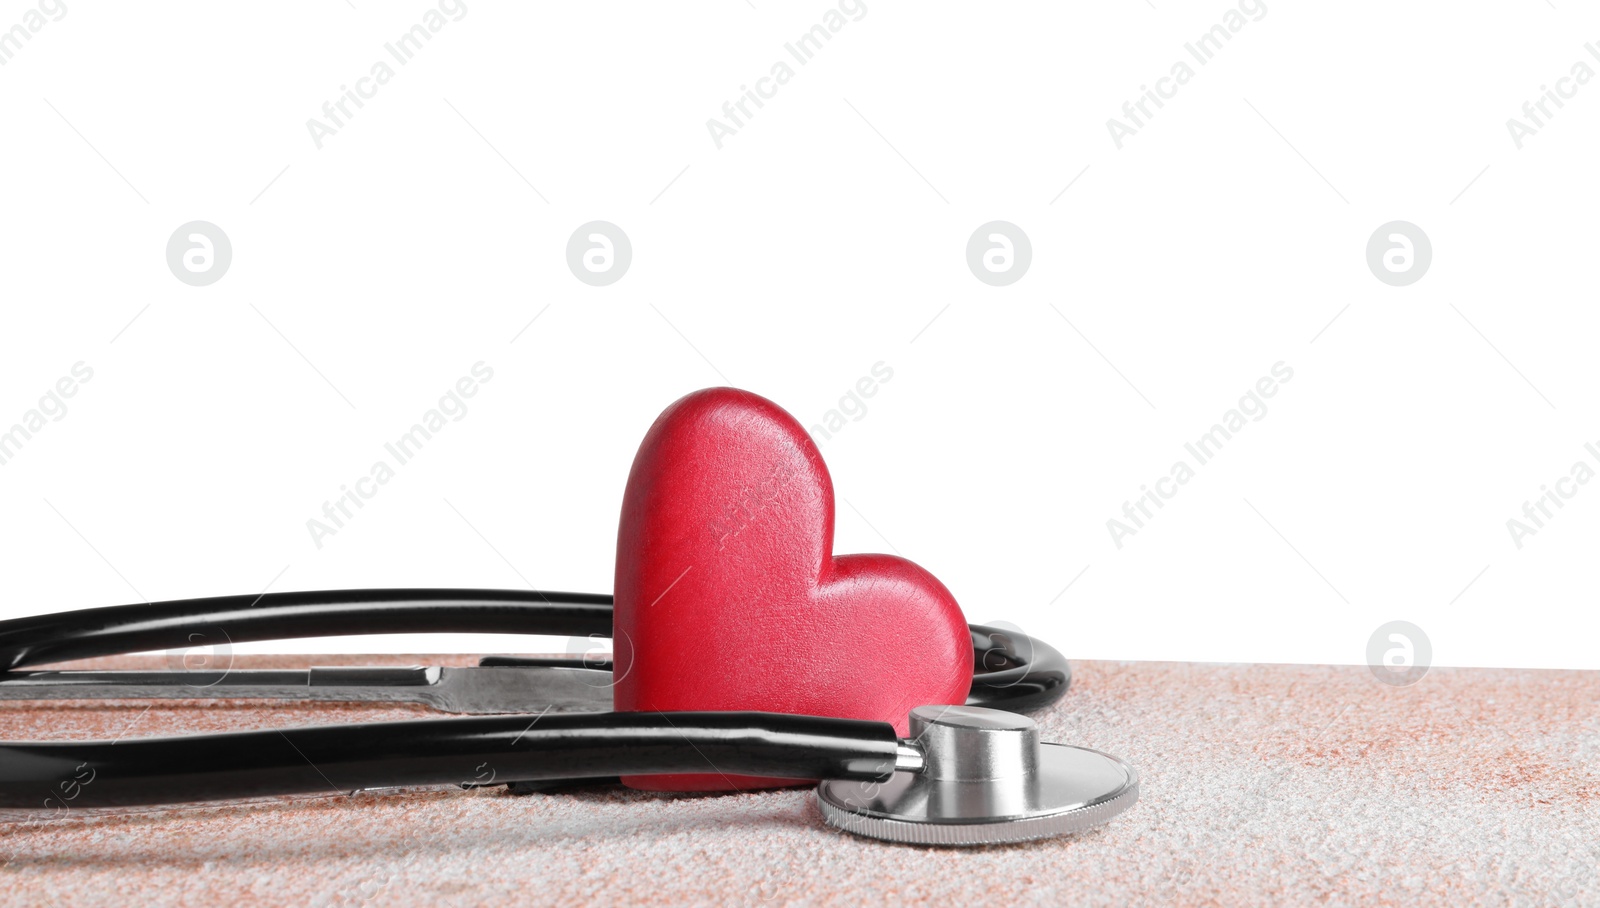 Photo of Stethoscope and red heart on color textured table against white background, space for text